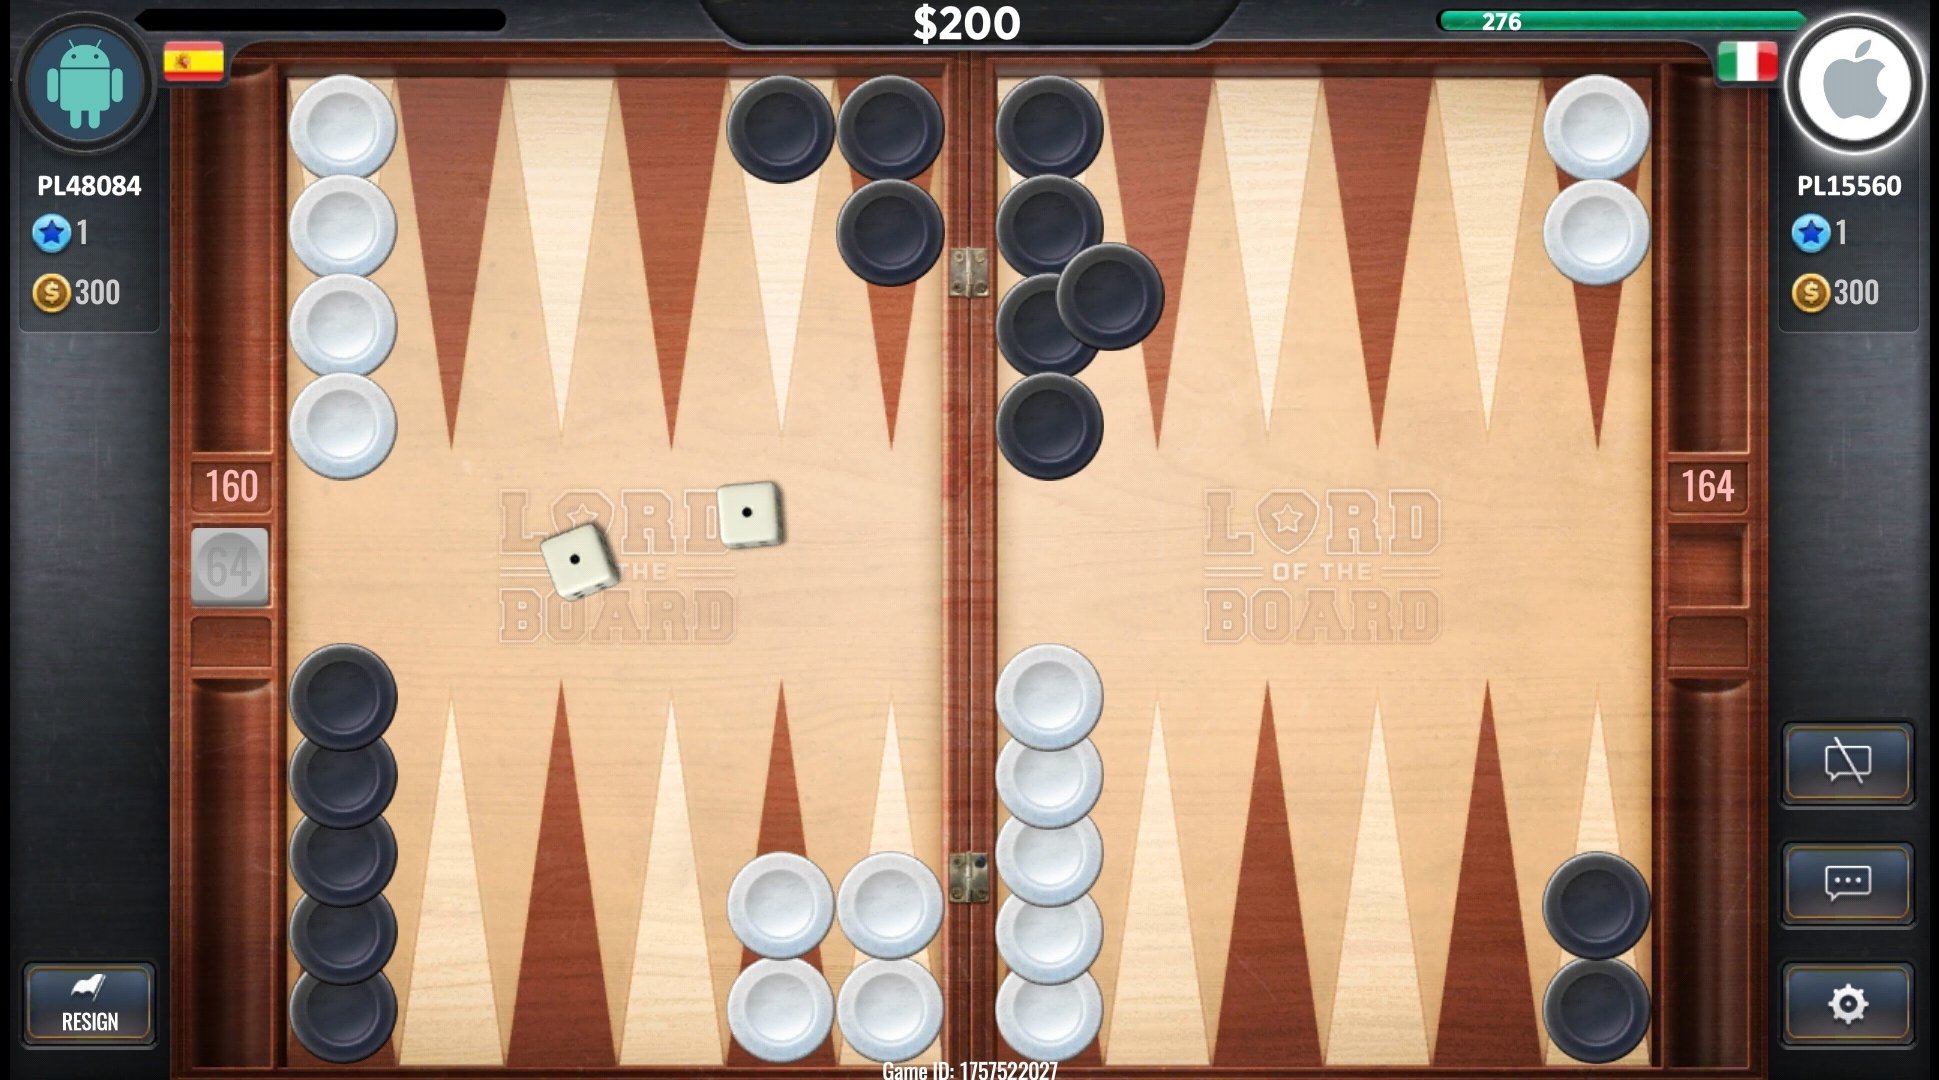 Lord Of The Board Backgammon 1 4 722 Android用ダウンロードapk無料